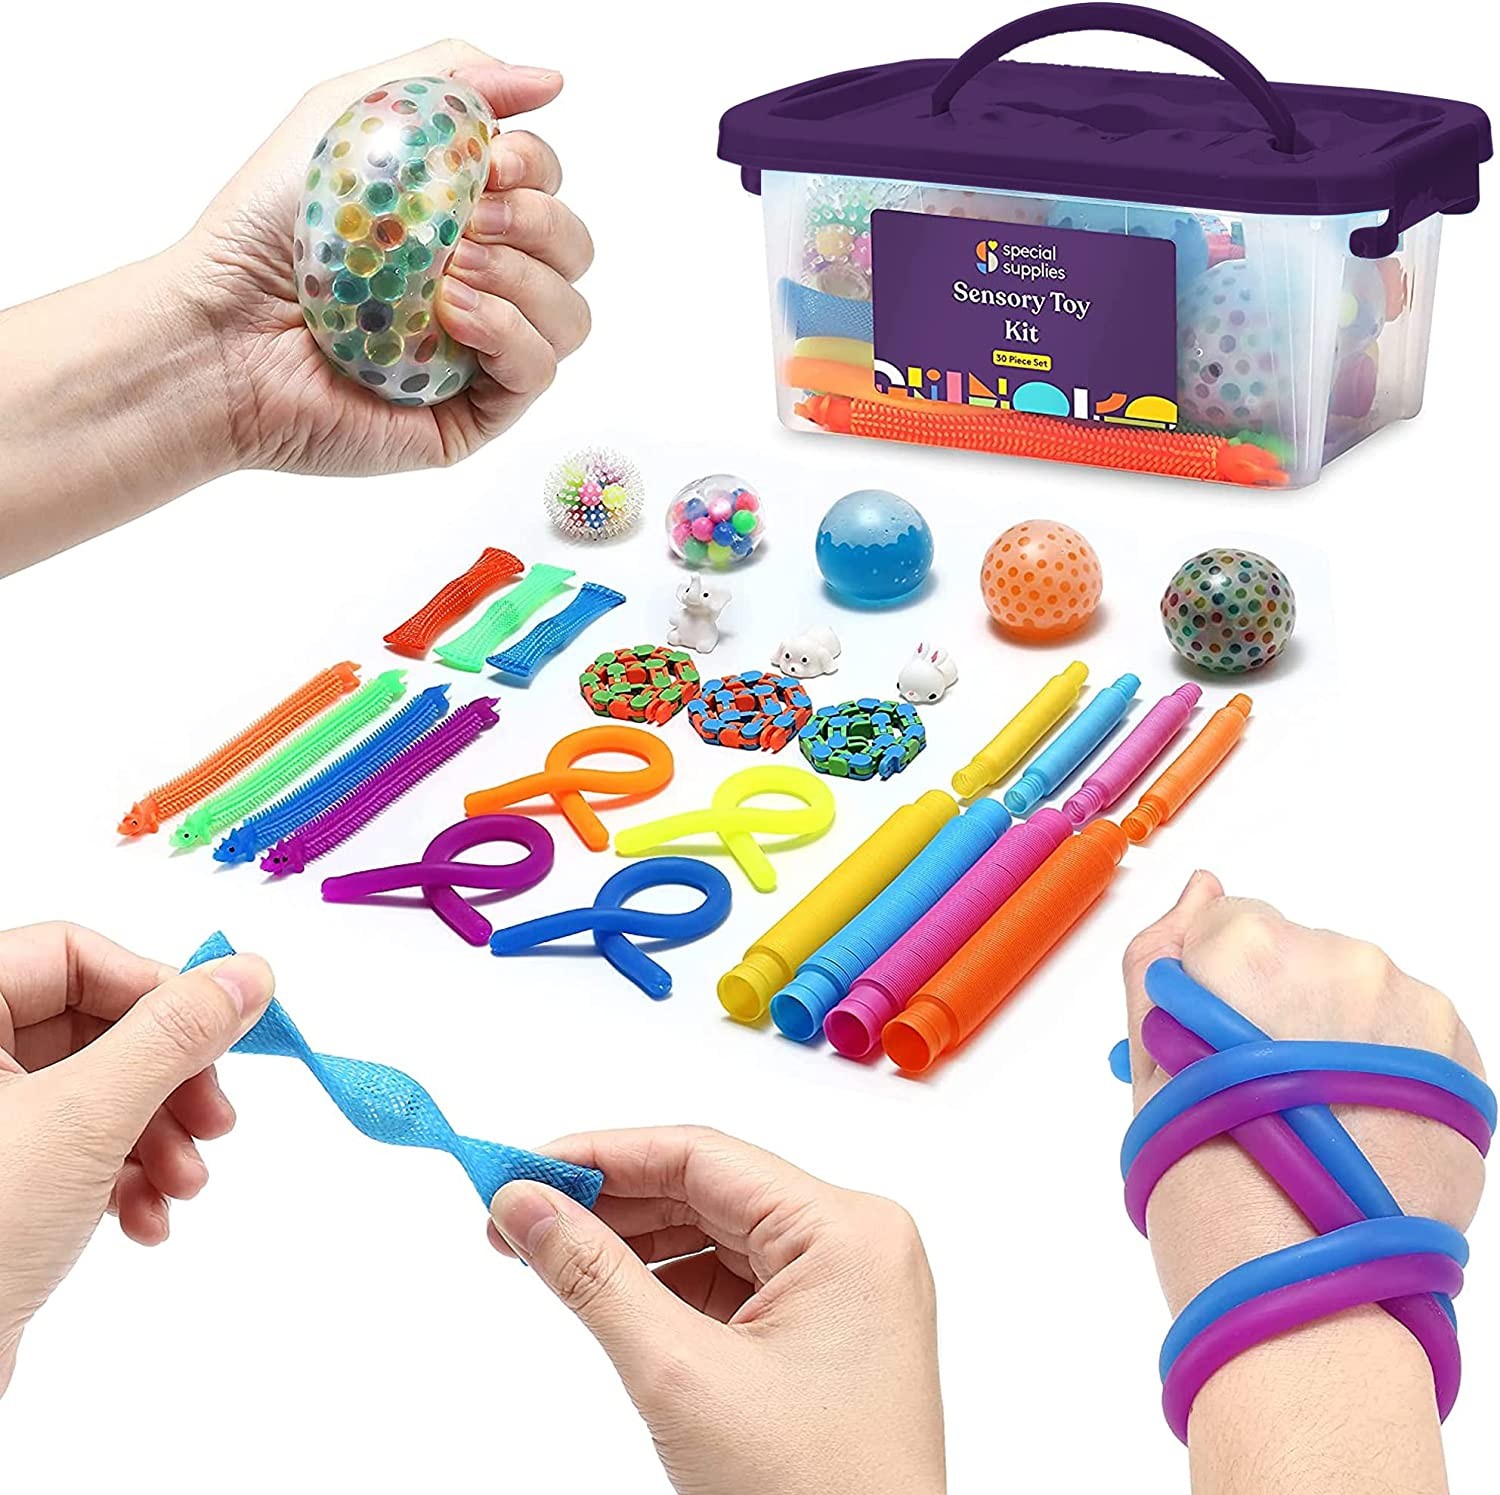 What Are Sensory Items and Sensory Toys?